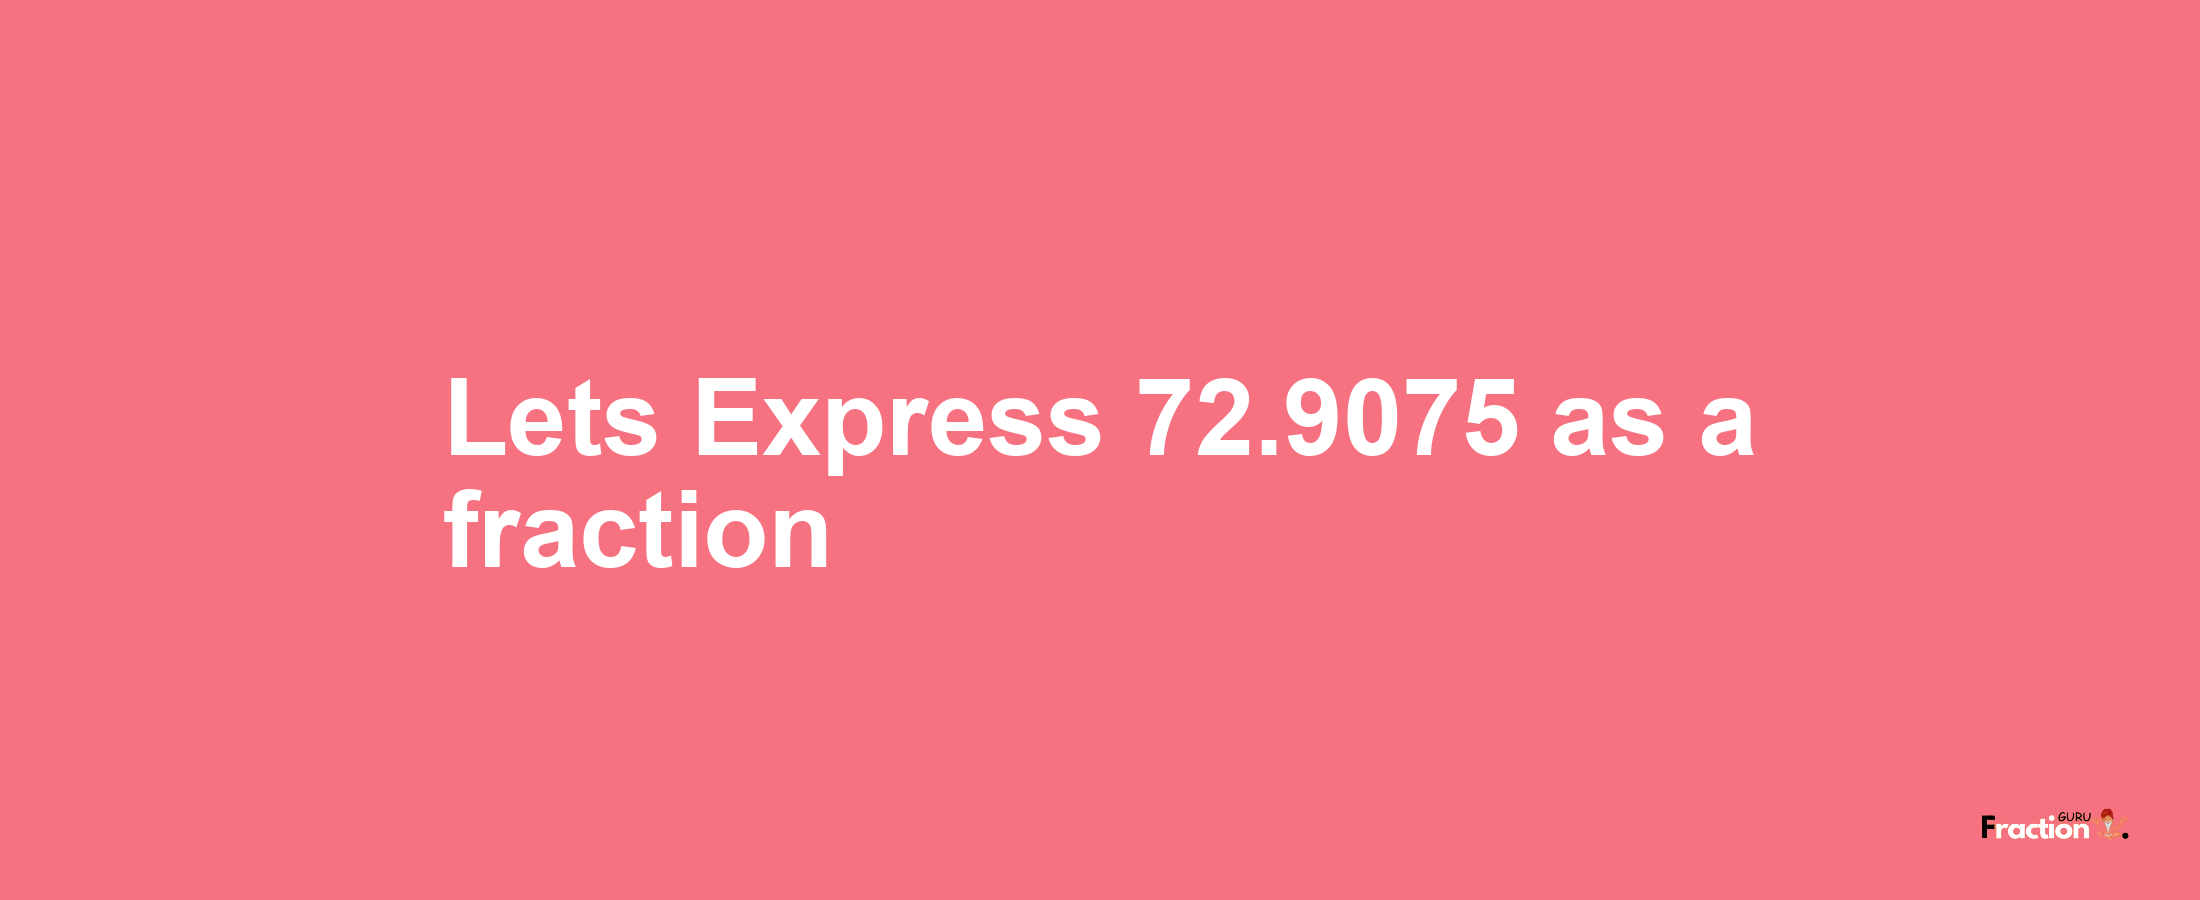 Lets Express 72.9075 as afraction